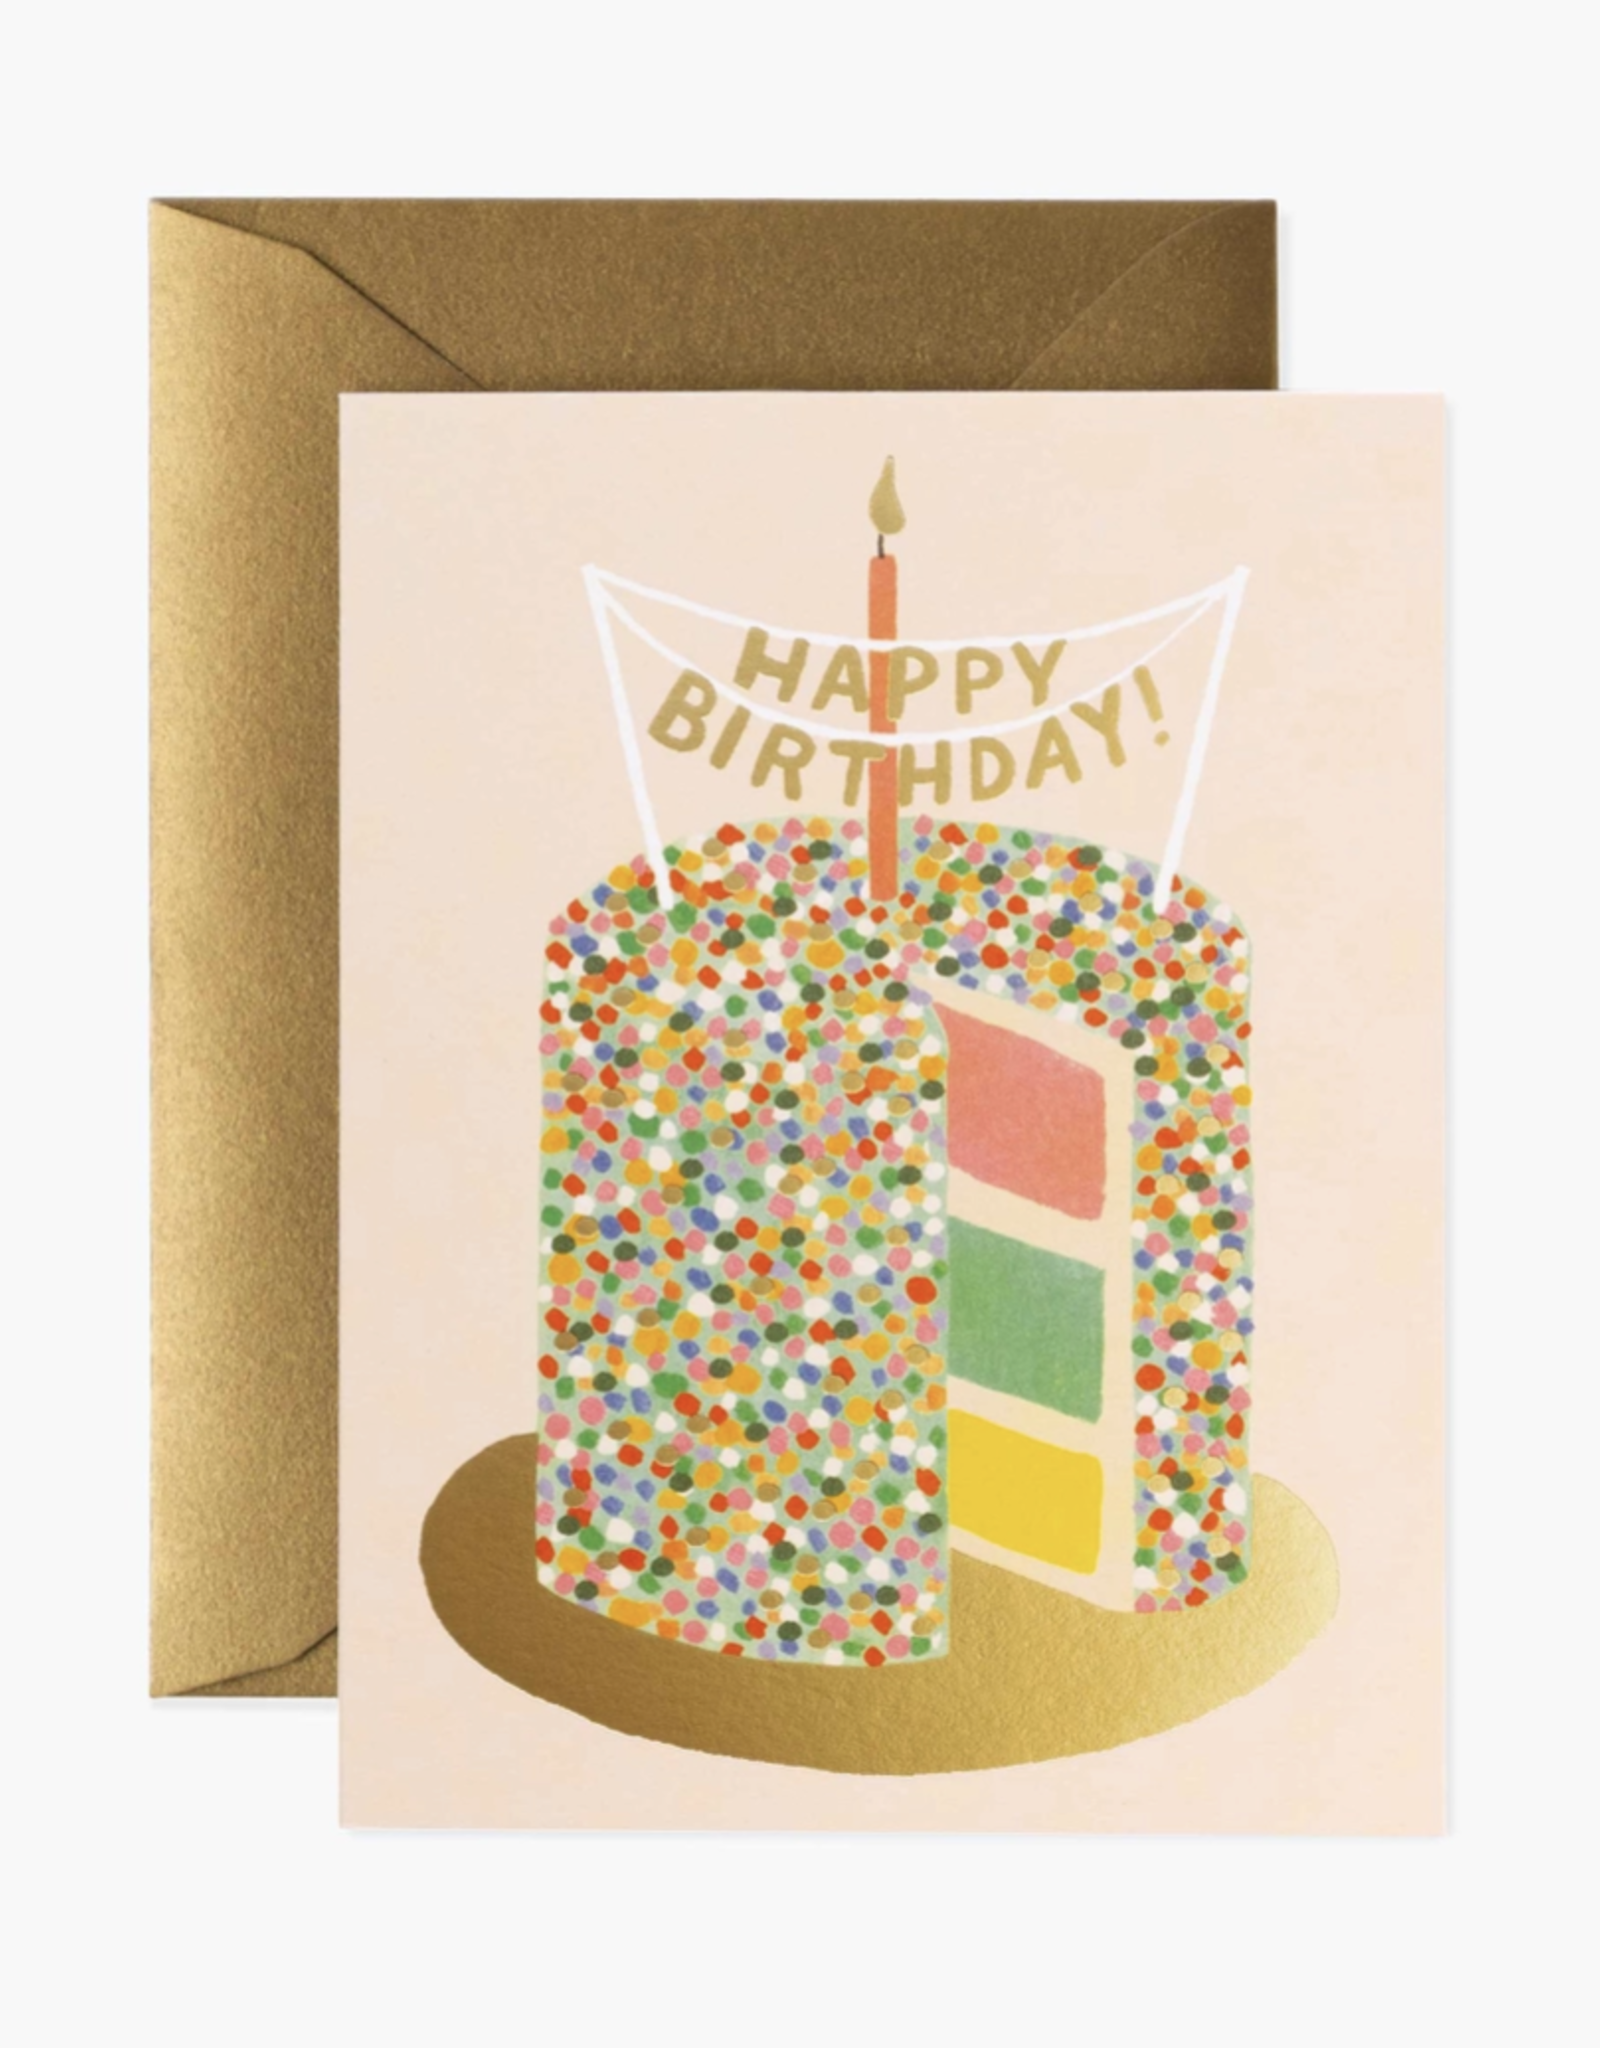 Rifle Paper Co. layer cake birthday card